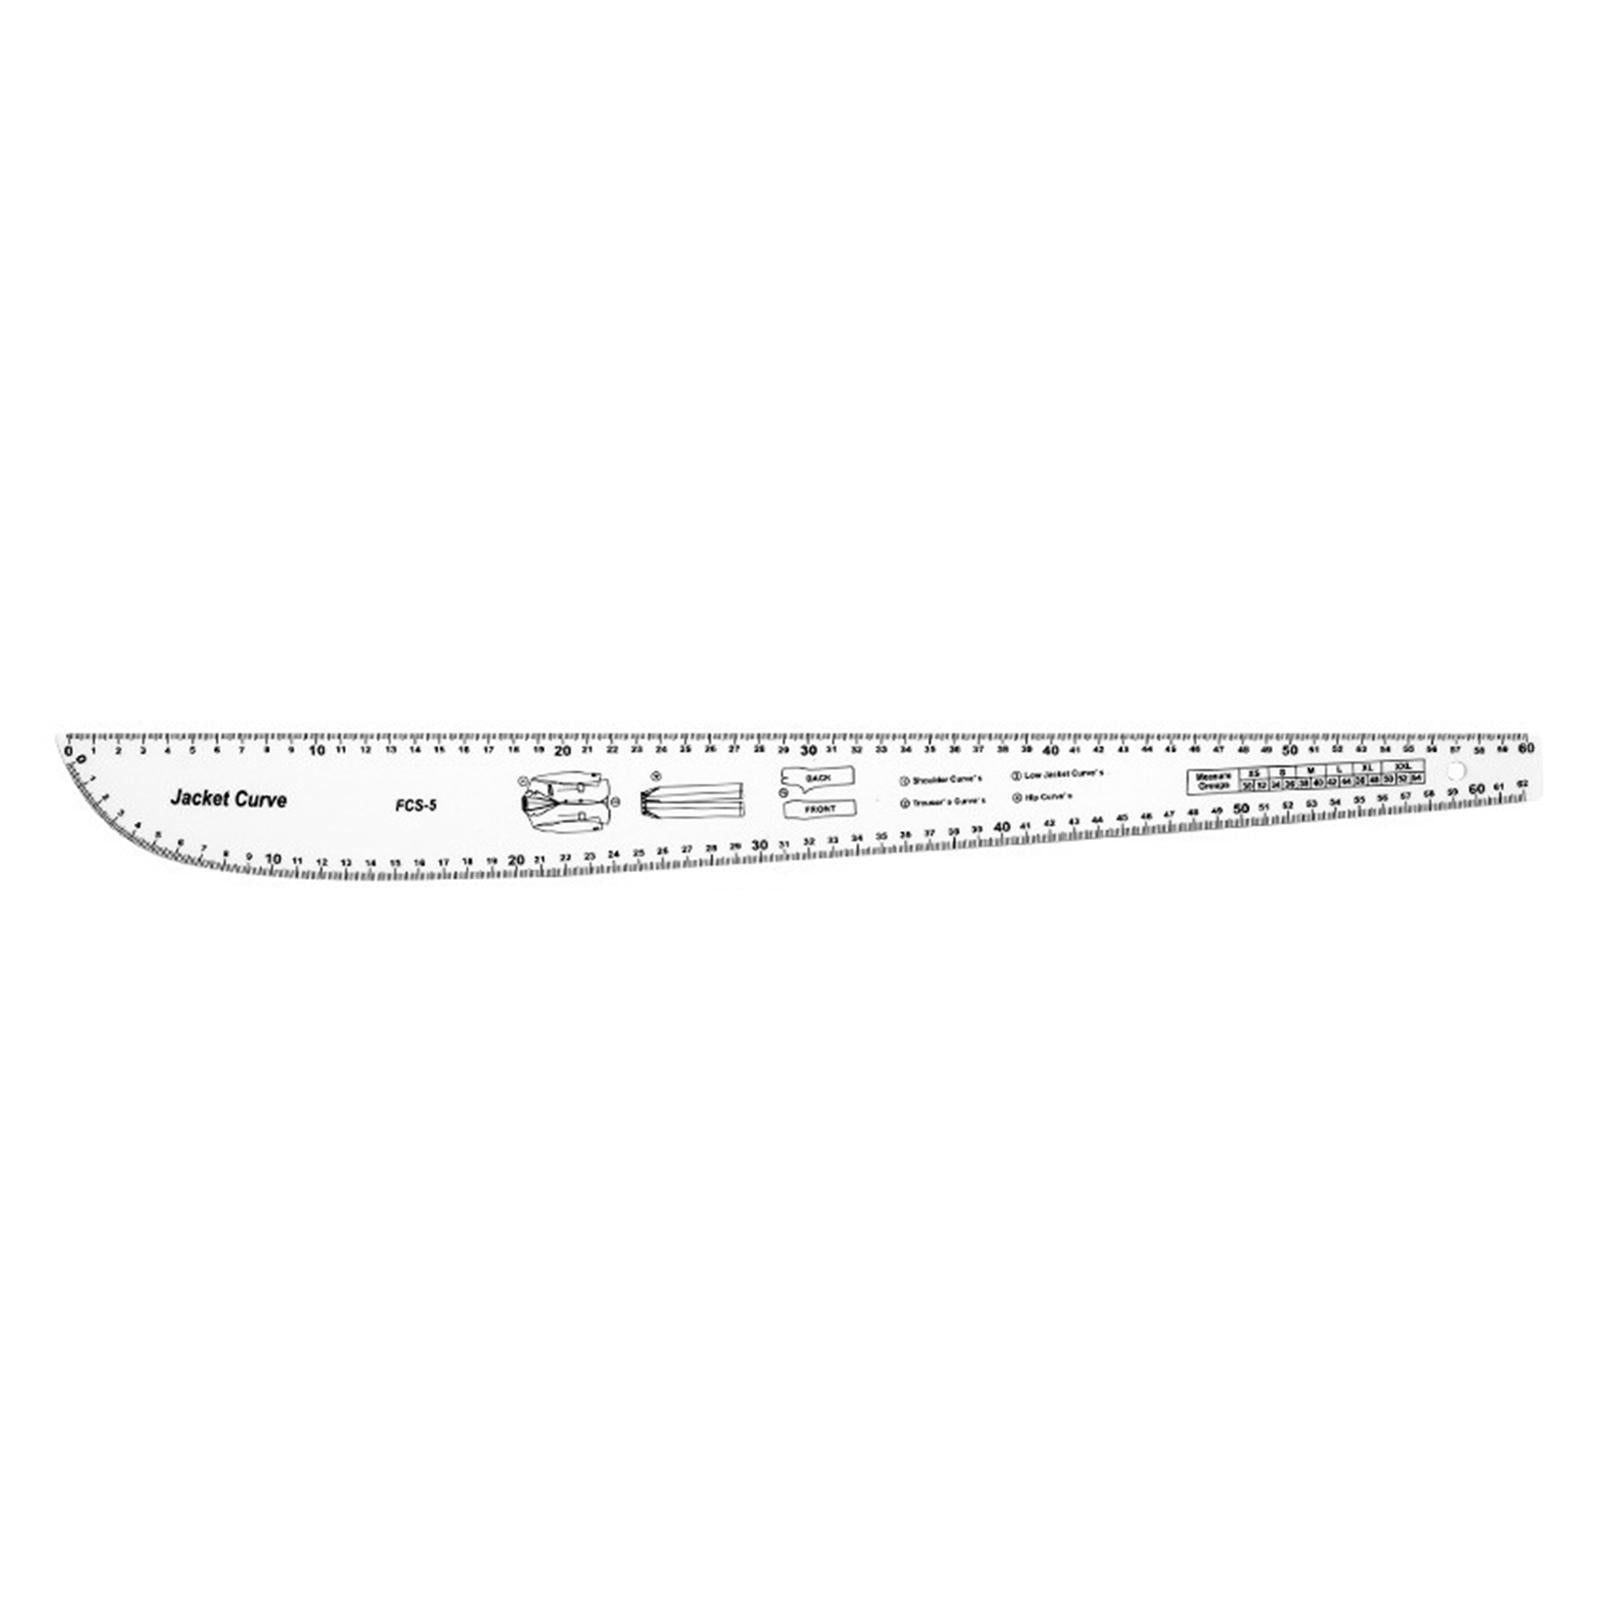 Sewing Measurement Professional Tailor Craft Tool Clothing Model Tailor Ruler Built-in Scale Drawing Ruler